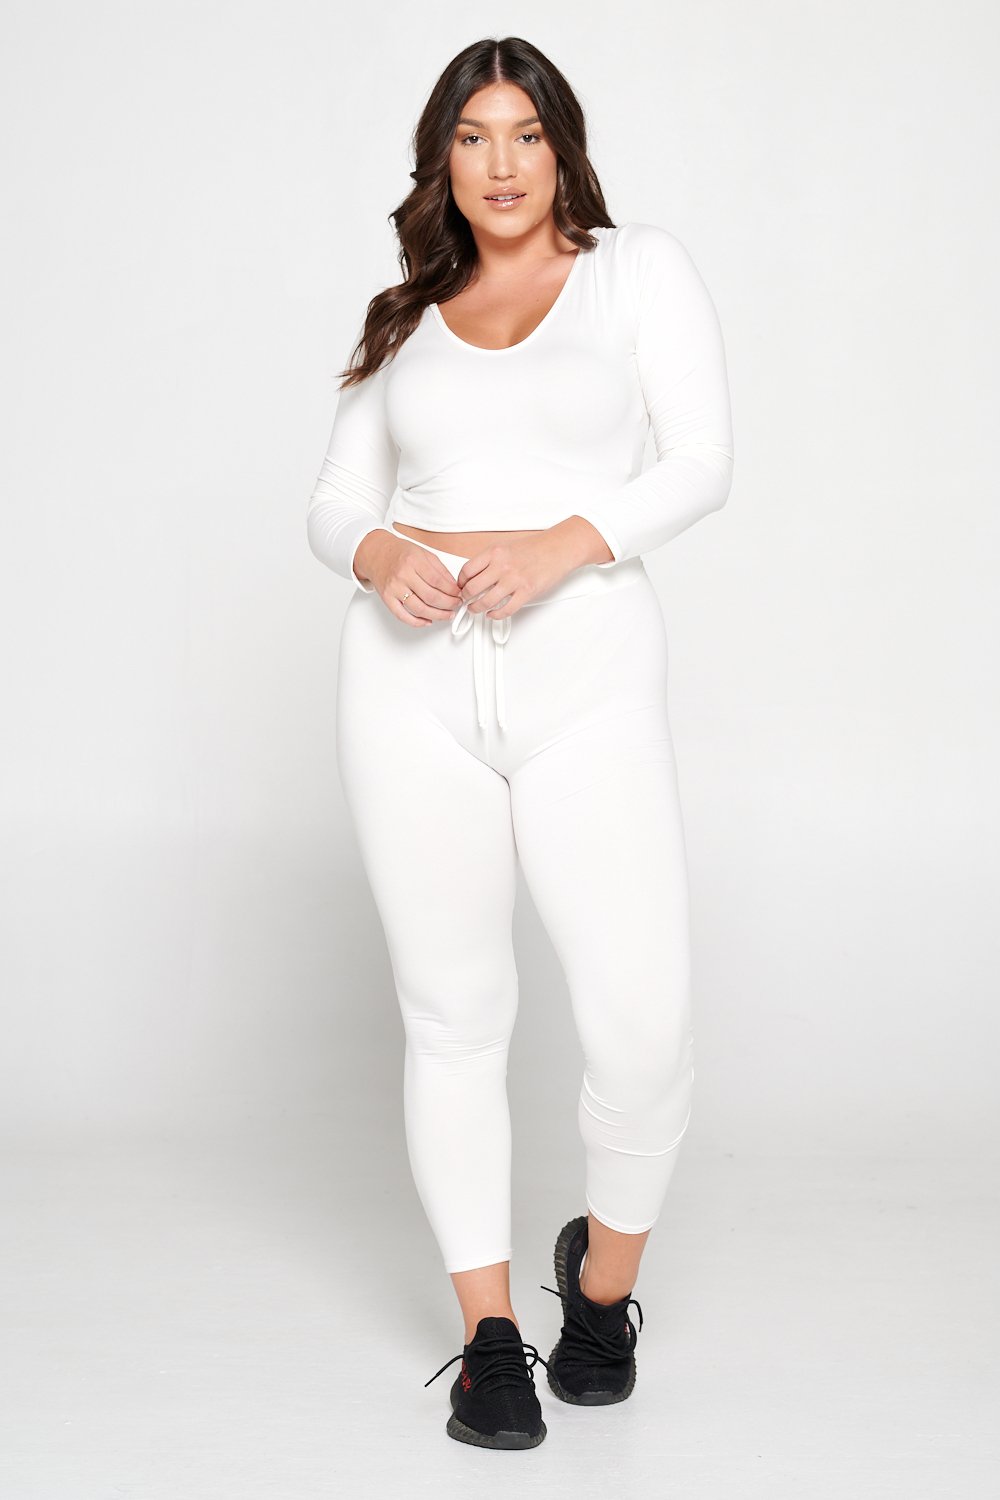 livd L I V D women's contemporary plus size  scoop neck crop hoodie and elastic band sweatpant with faux drawstring in off white